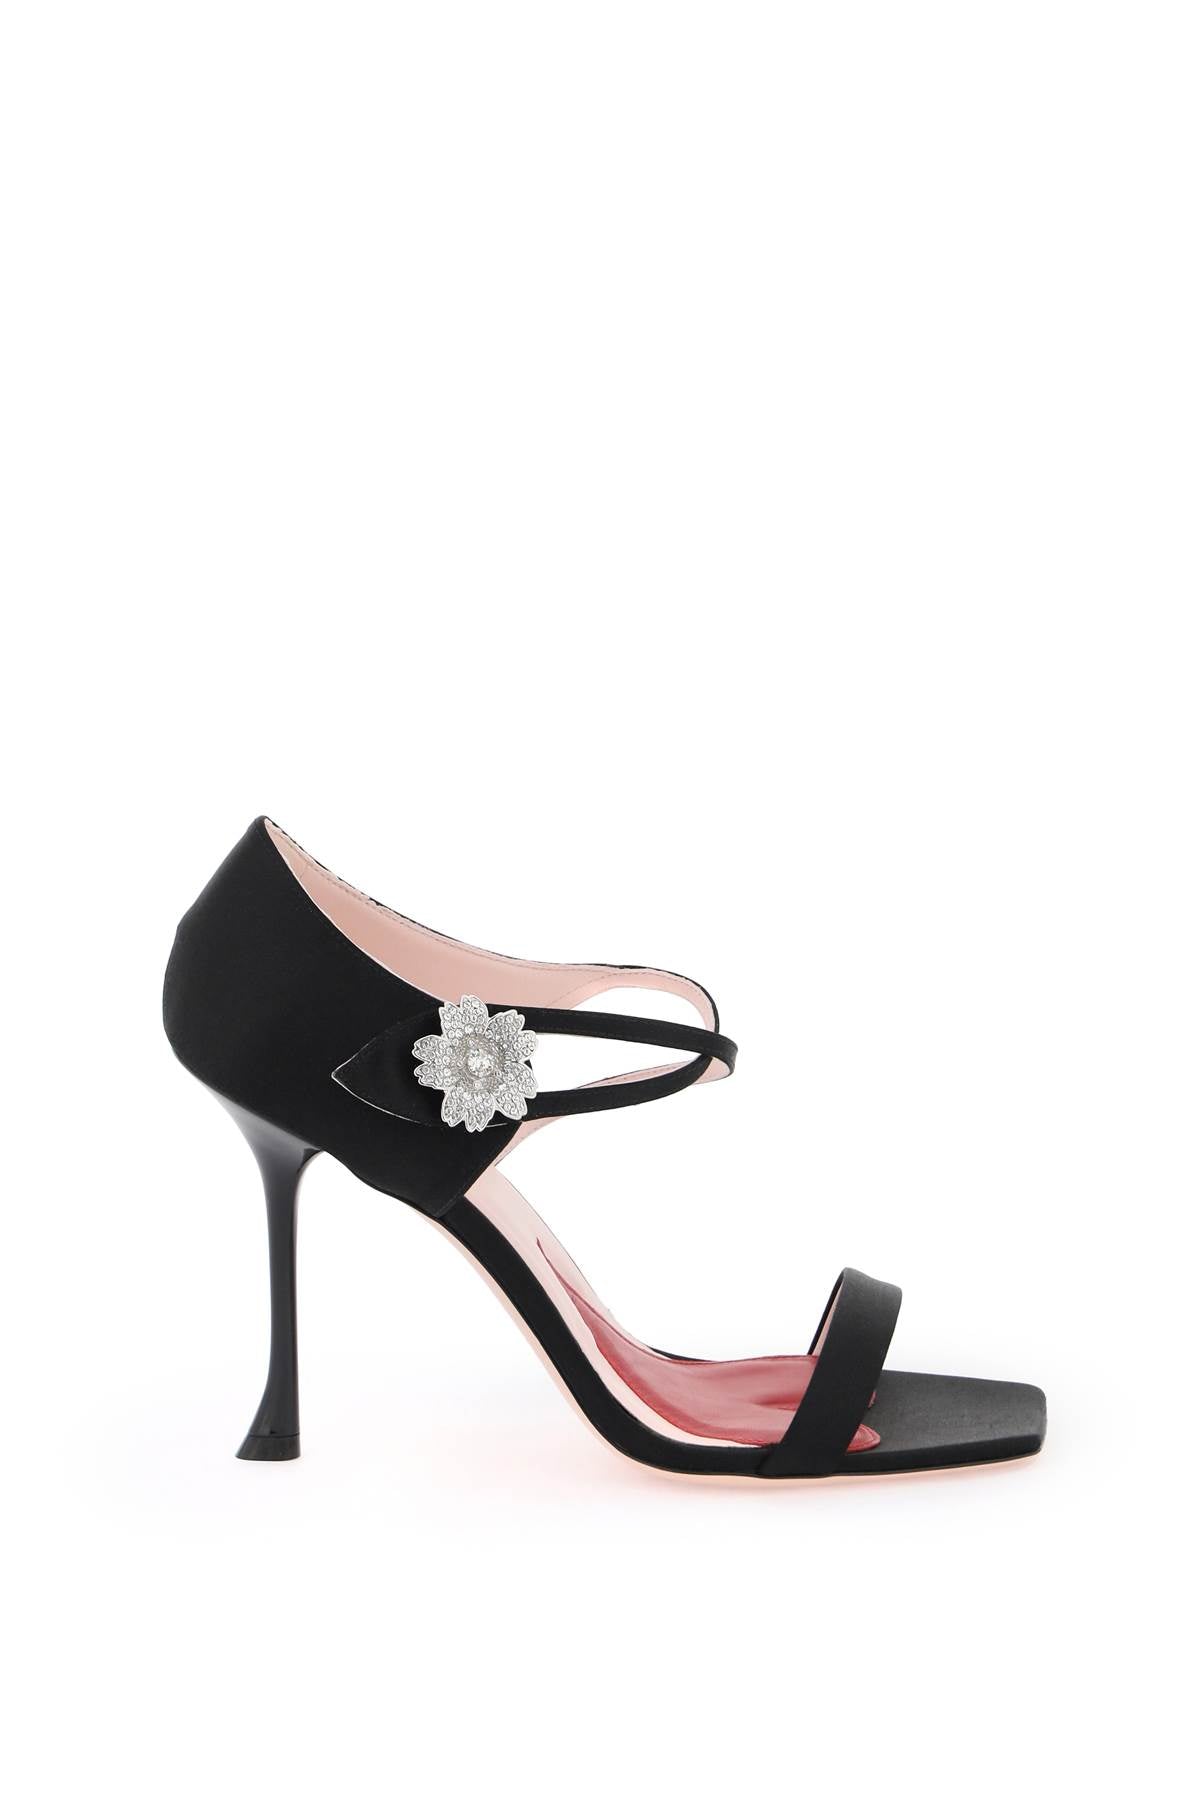 Satin Sandals with Crystal-Embellished Daisy Straps